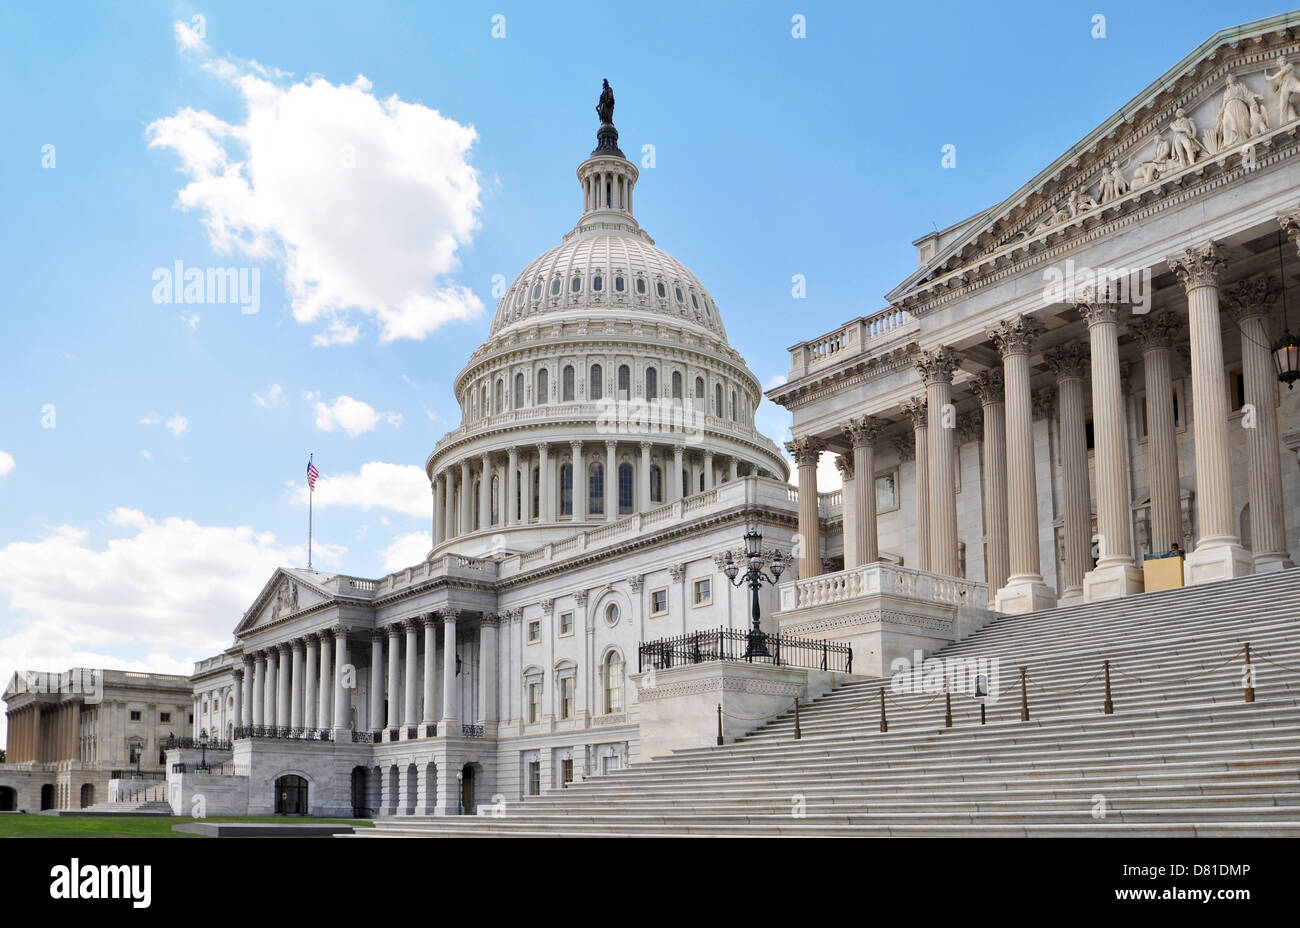 The US Capitol seen from the side. The Capitol represents Washington and and American power. Stock Photo